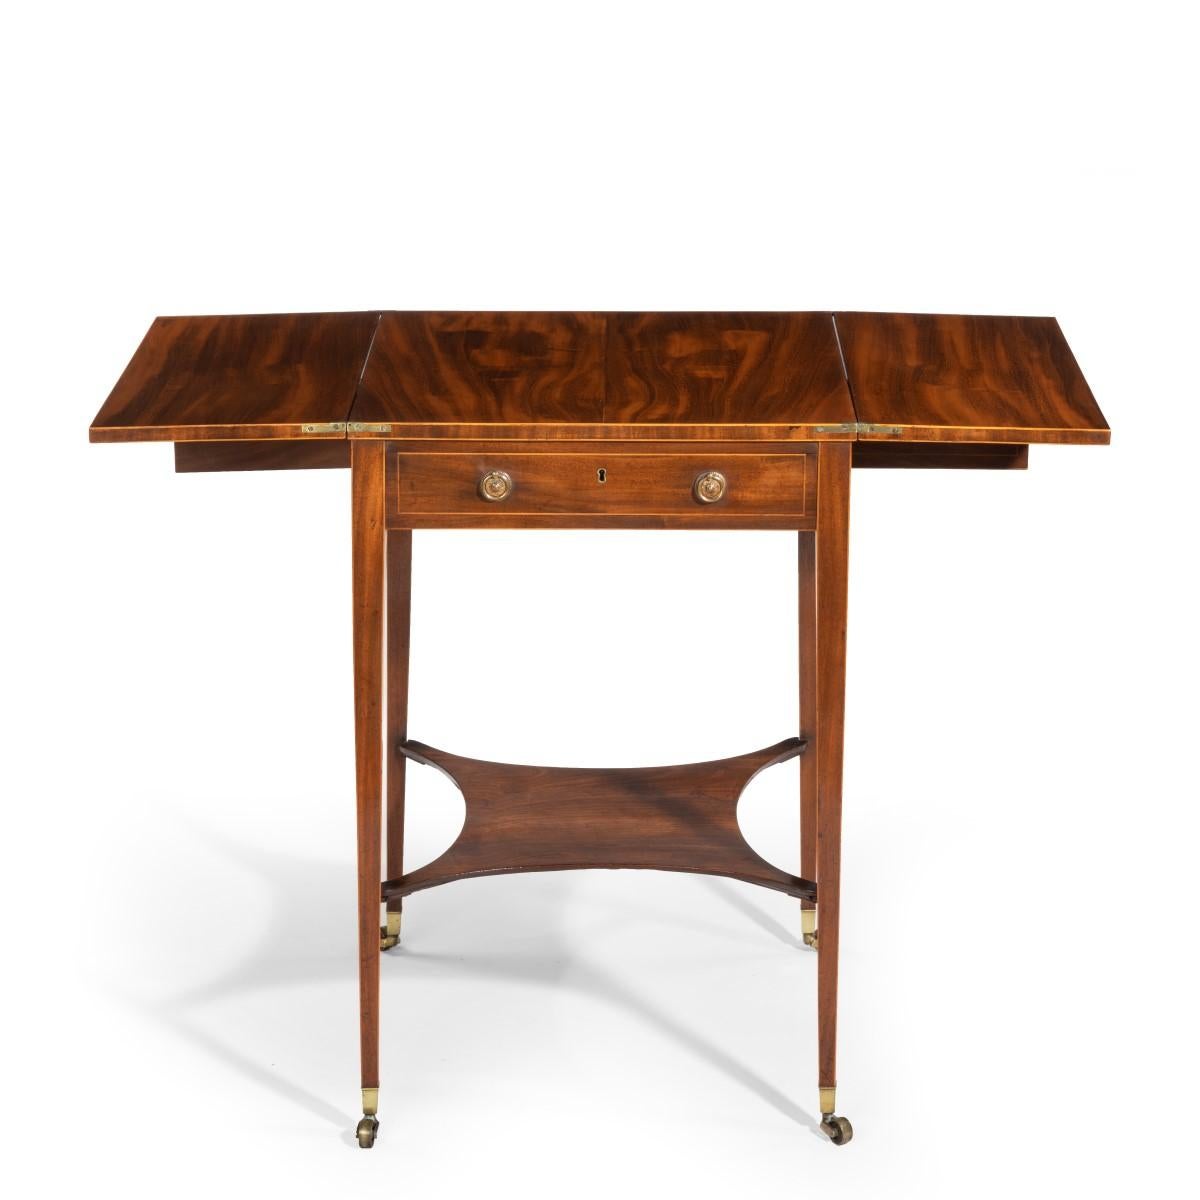 Sheraton Period George III Mahogany Patience Table For Sale 4